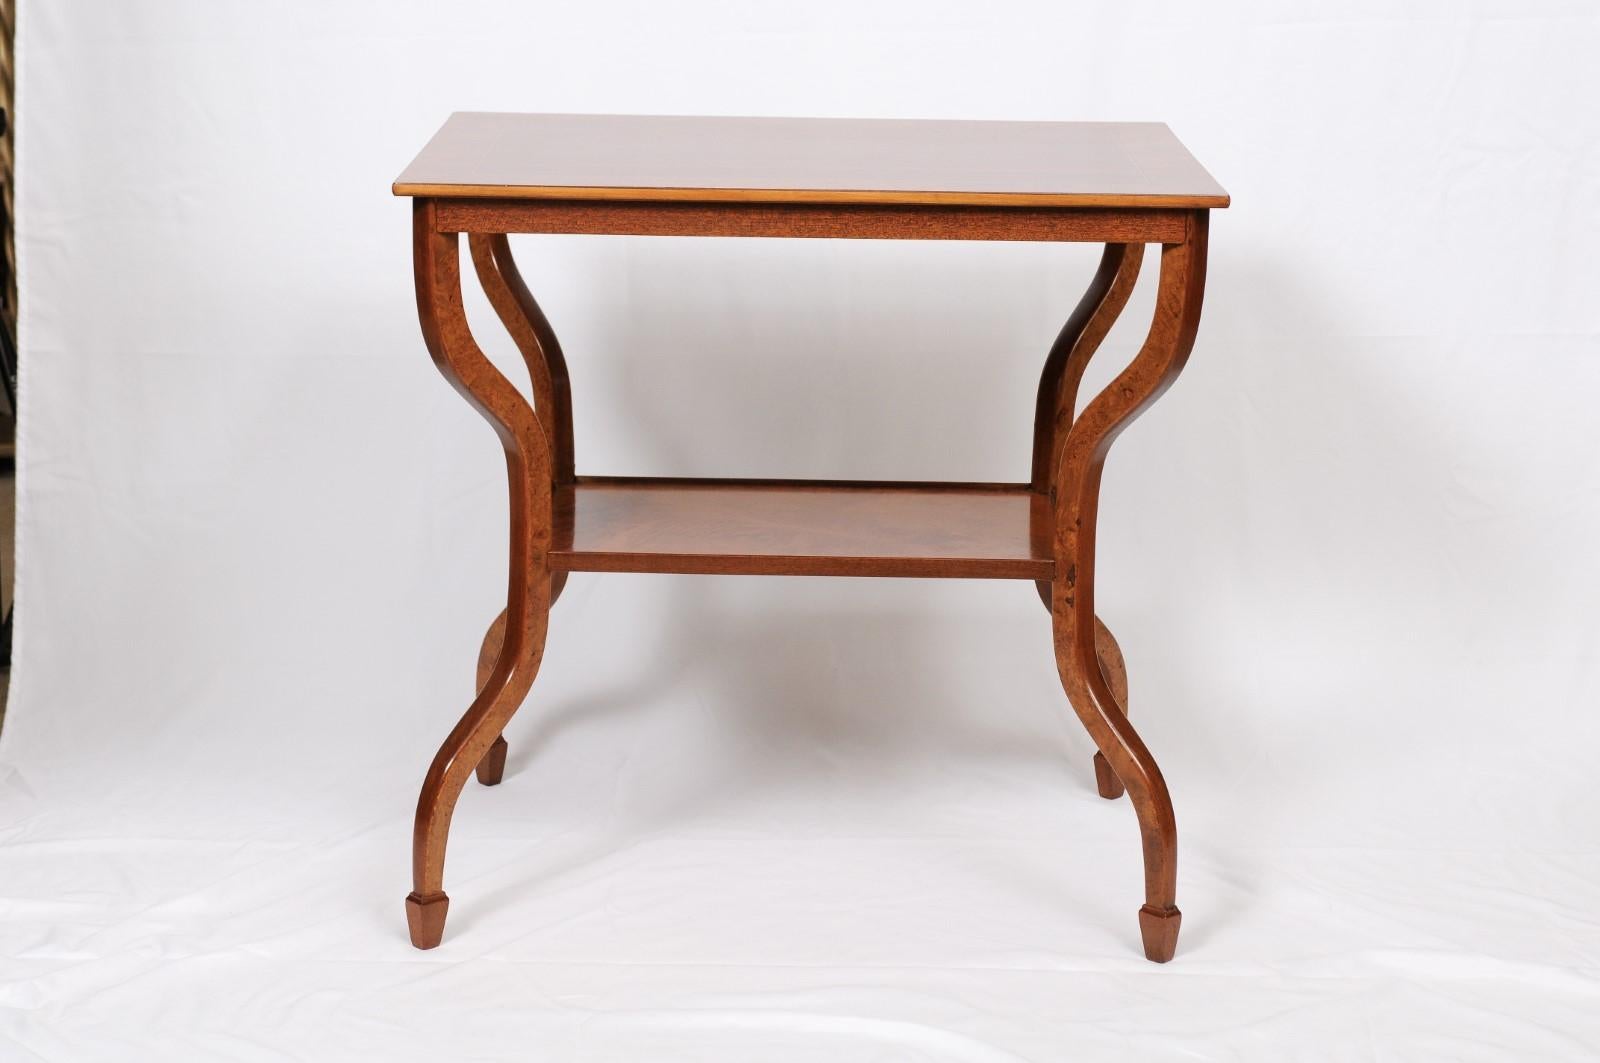 Modernist French-style wood side or end tables. An overhanging top above a lower shelf with inverted cabriole legs. Dimensions: H 28 inches, W 20.5 inches, D 28.5 inches.